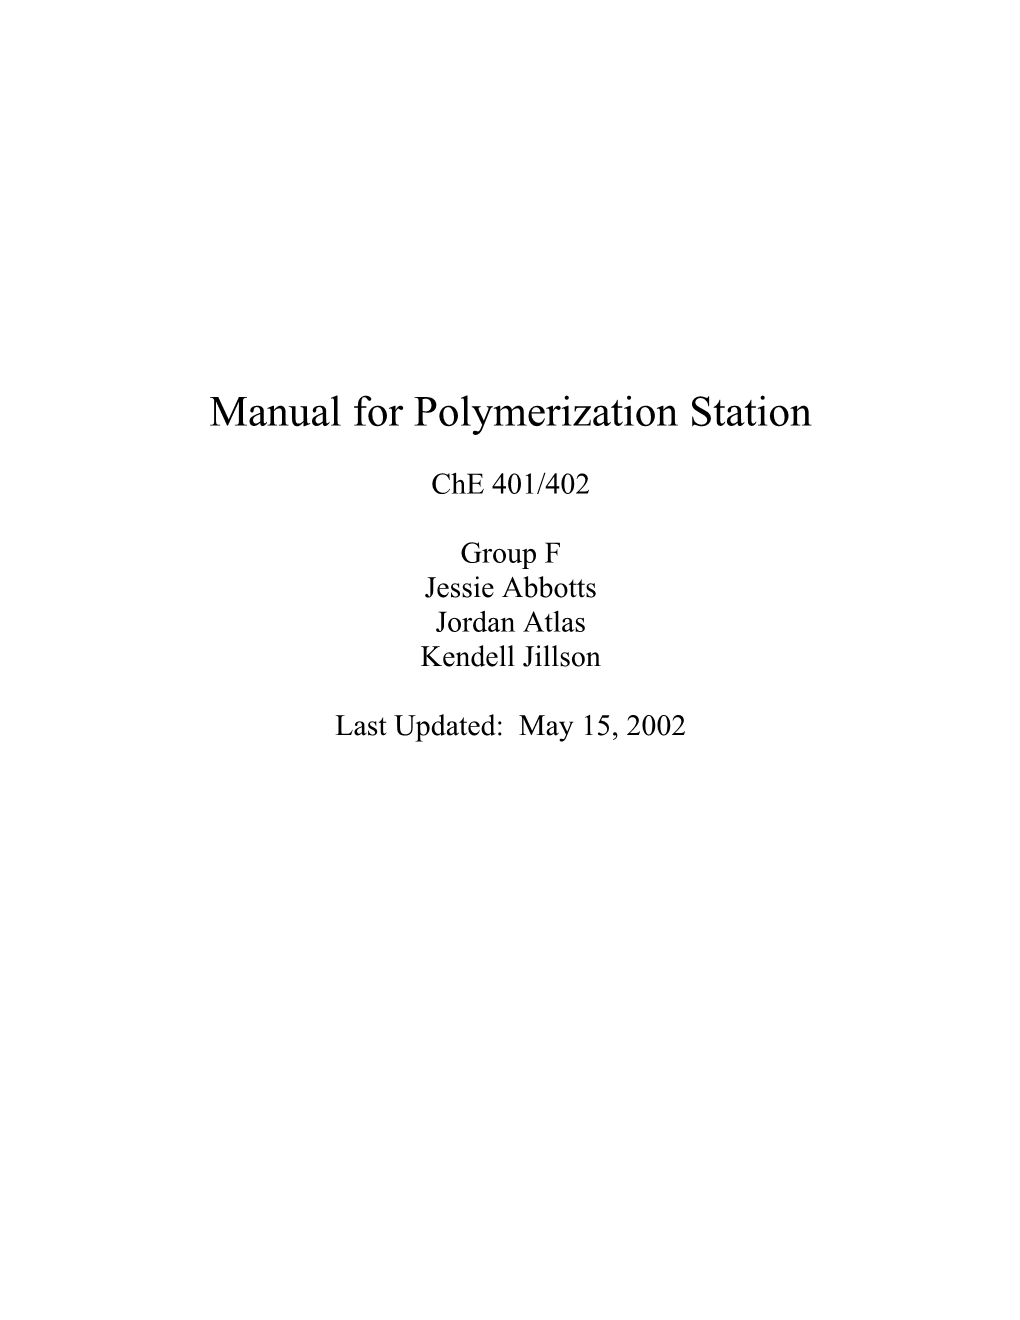 Manual for Polymerization Station